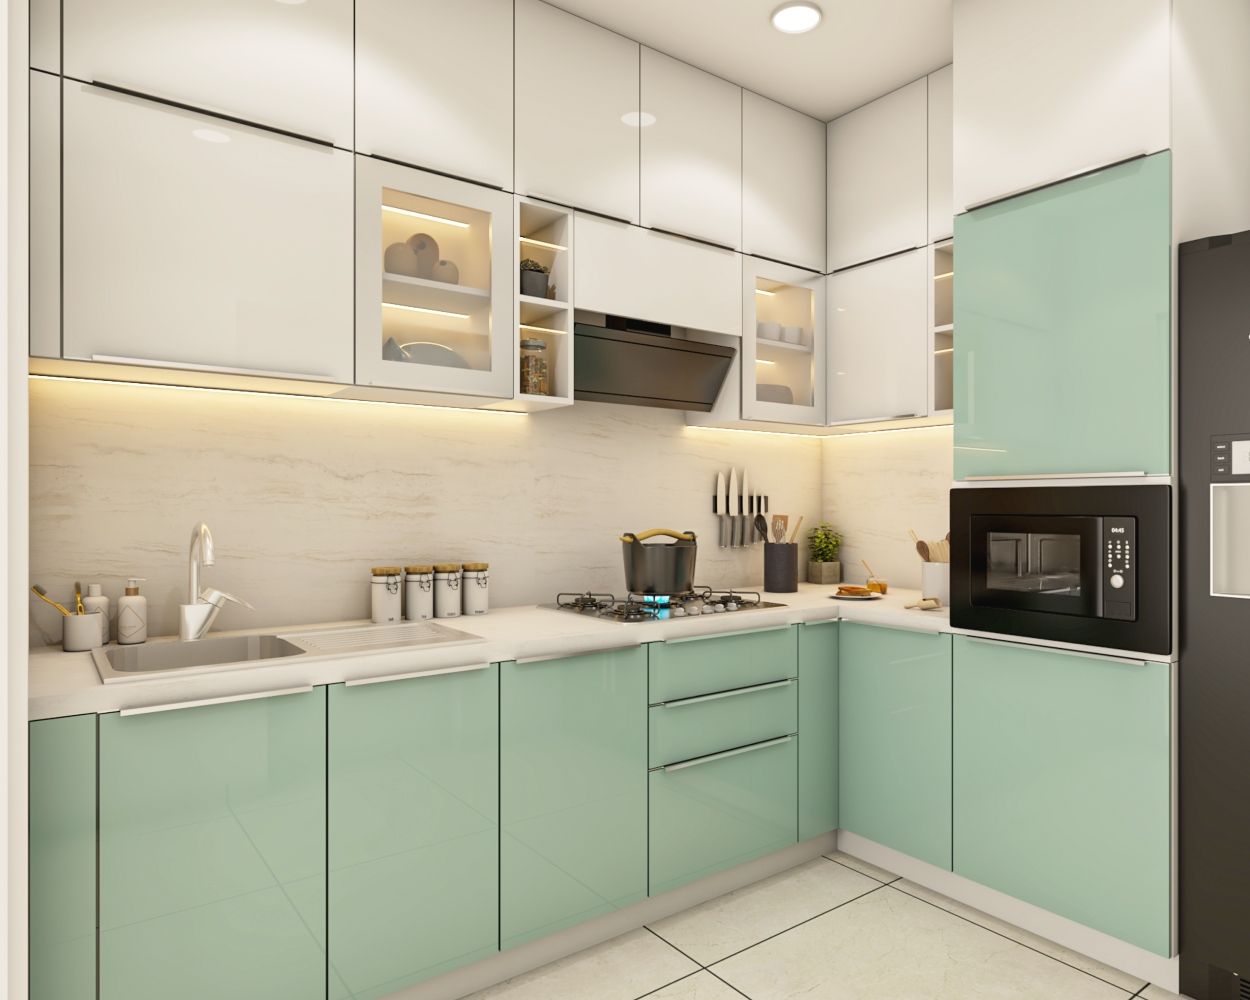 Modern L-Shape Modular Kitchen Design With Aqua Green And Frosty White Cabinets